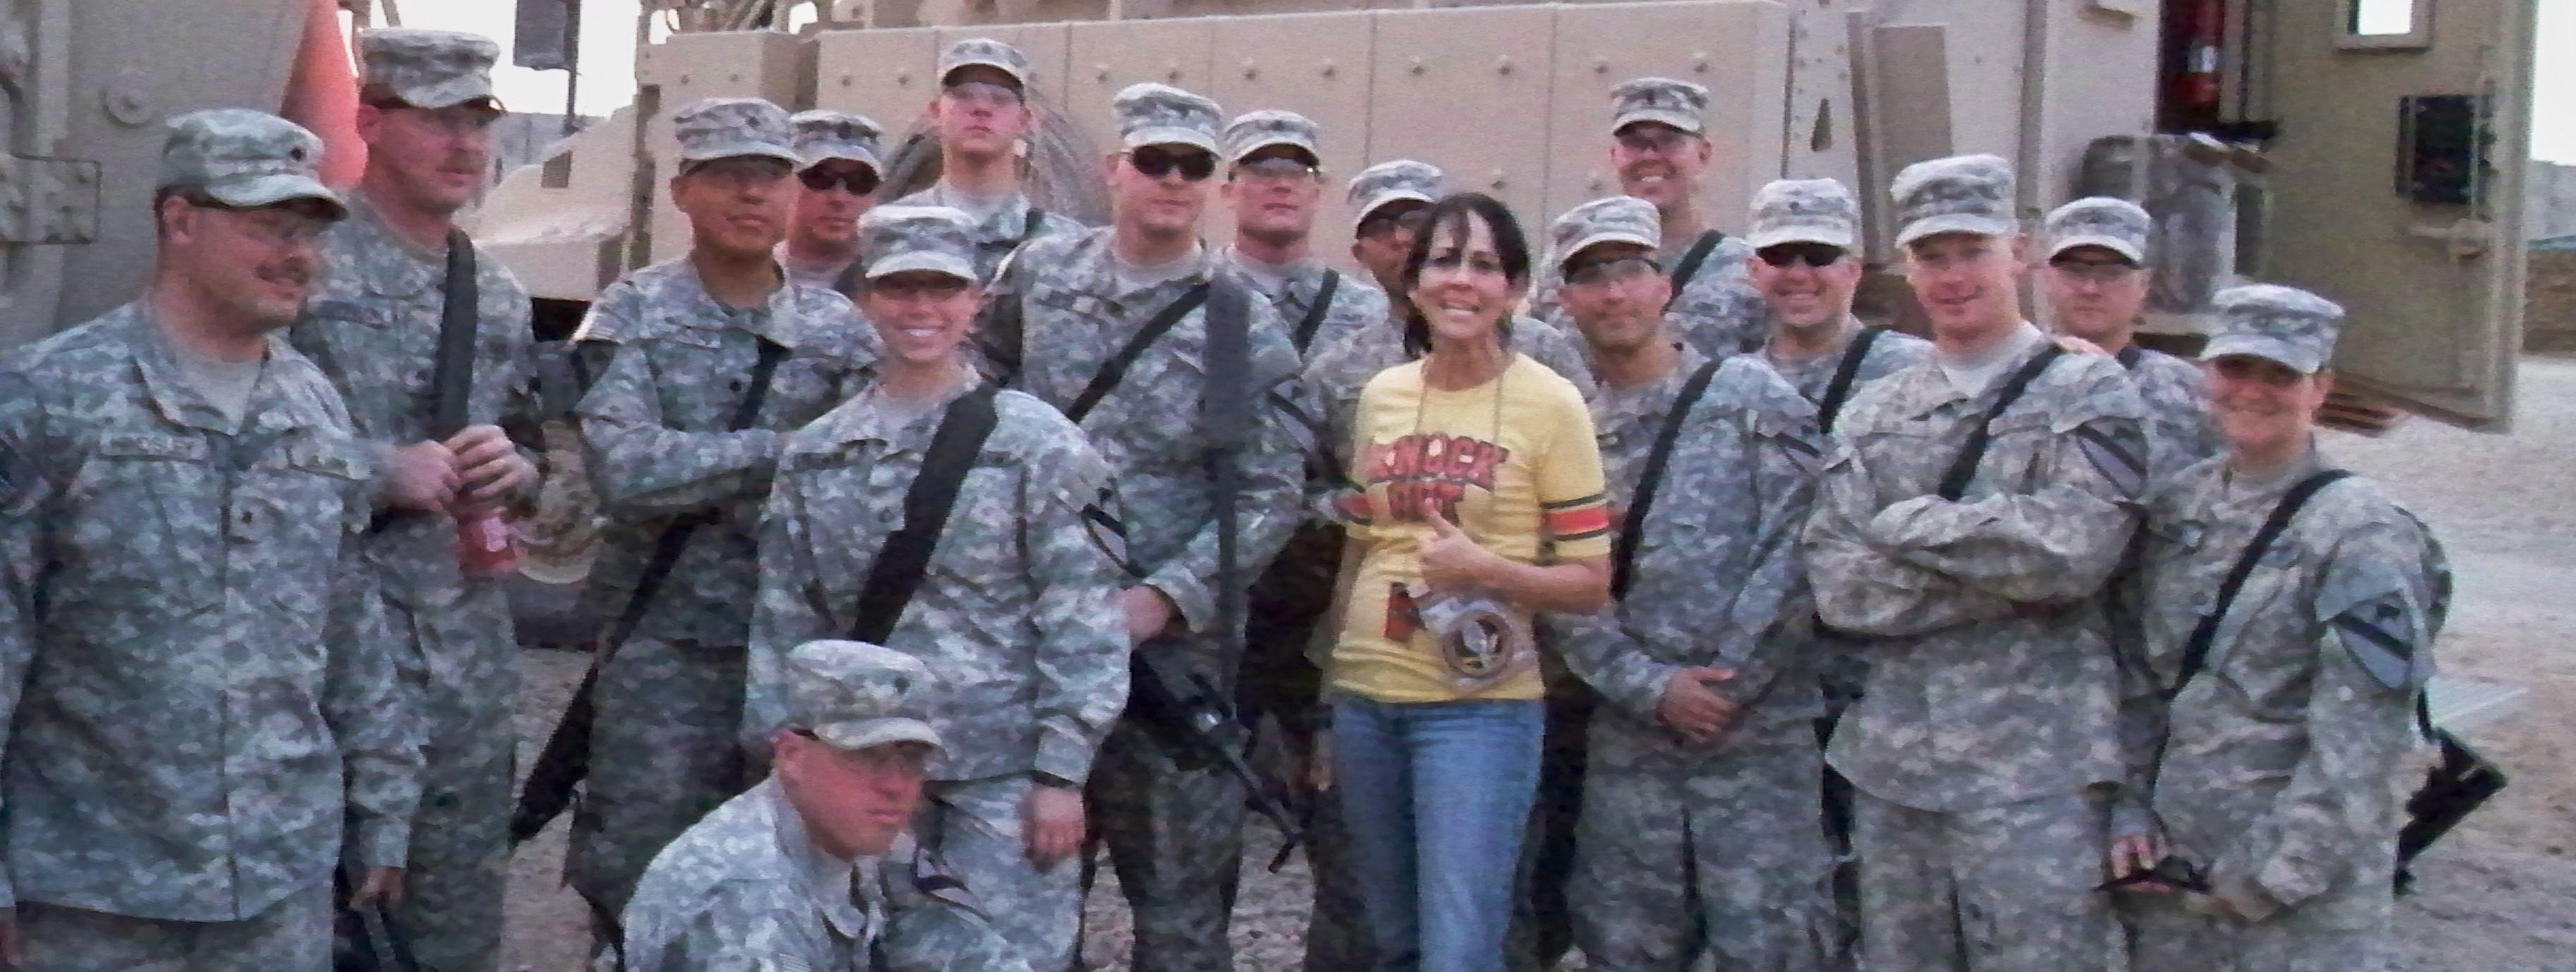 Woman in yellow shirt and jeans with group of soldiers in camouflage fatigues and hat. 